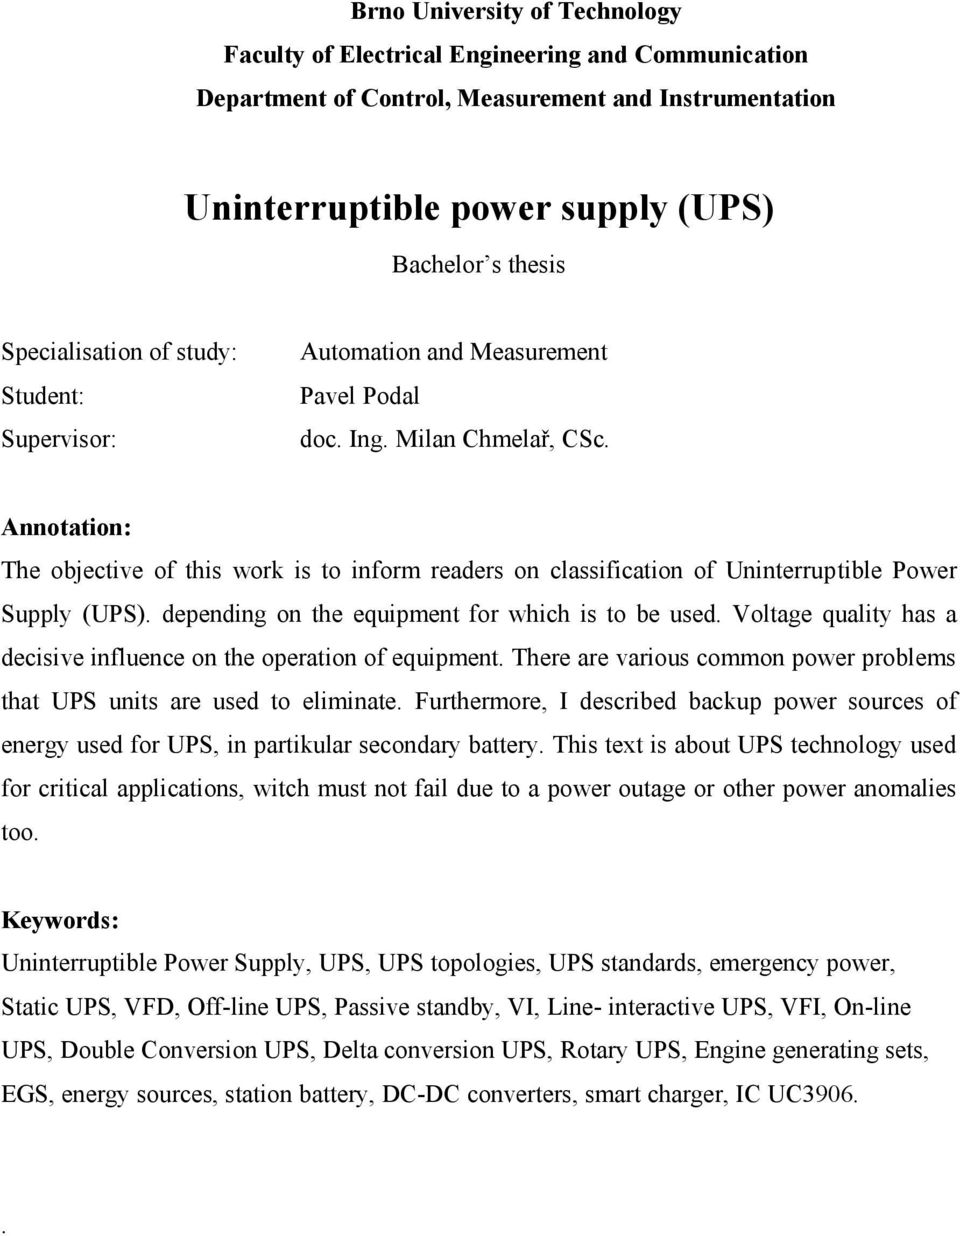 Annotation: The objective of this work is to inform readers on classification of Uninterruptible Power Supply (UPS). depending on the equipment for which is to be used.